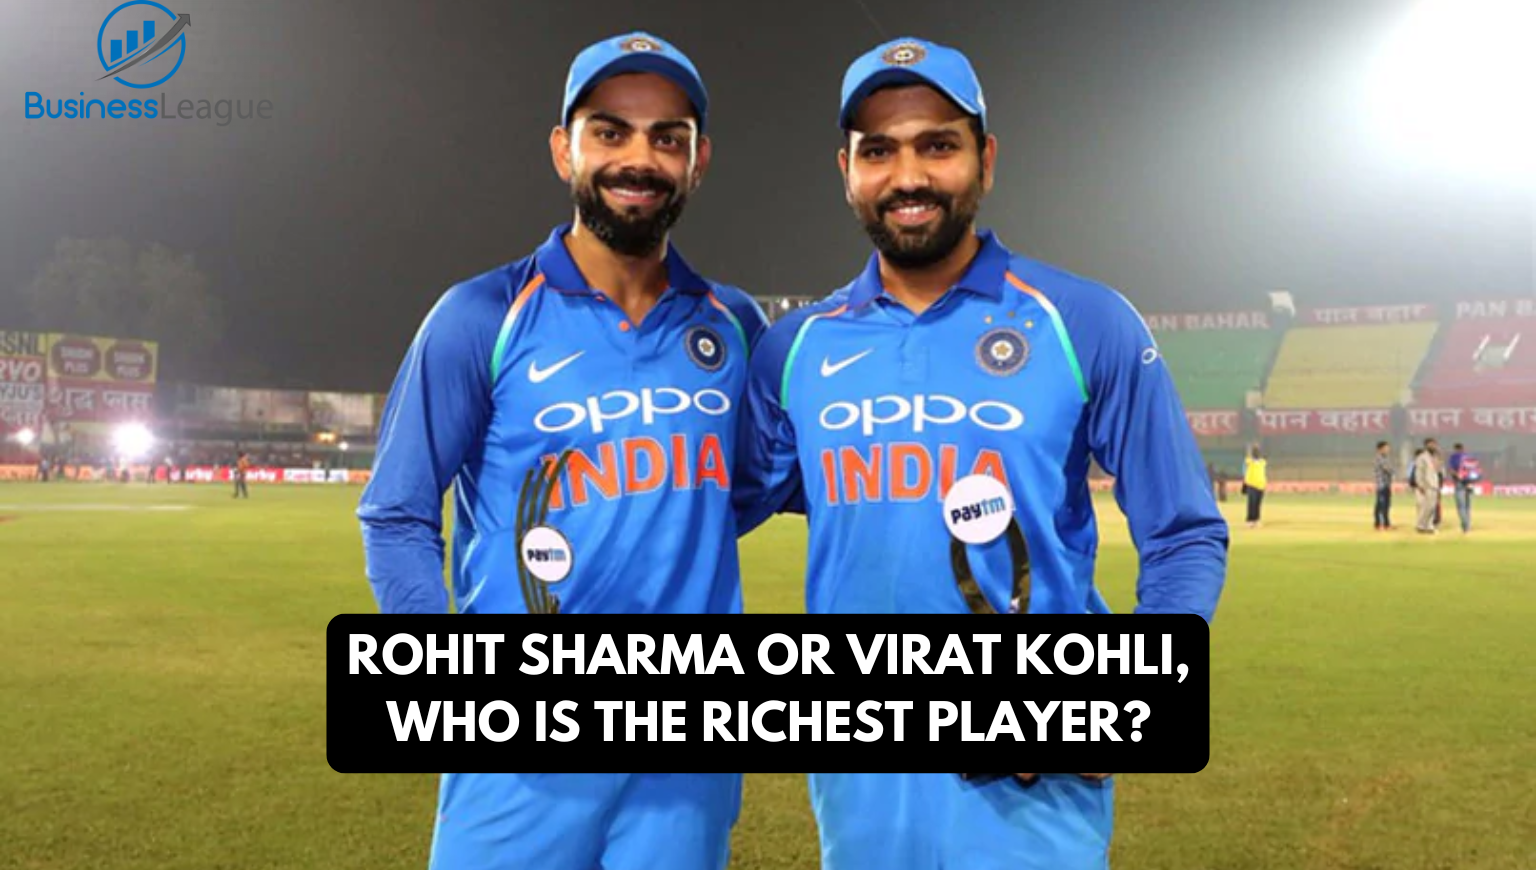 Rohit Sharma or Virat Kohli, who is the richest player?